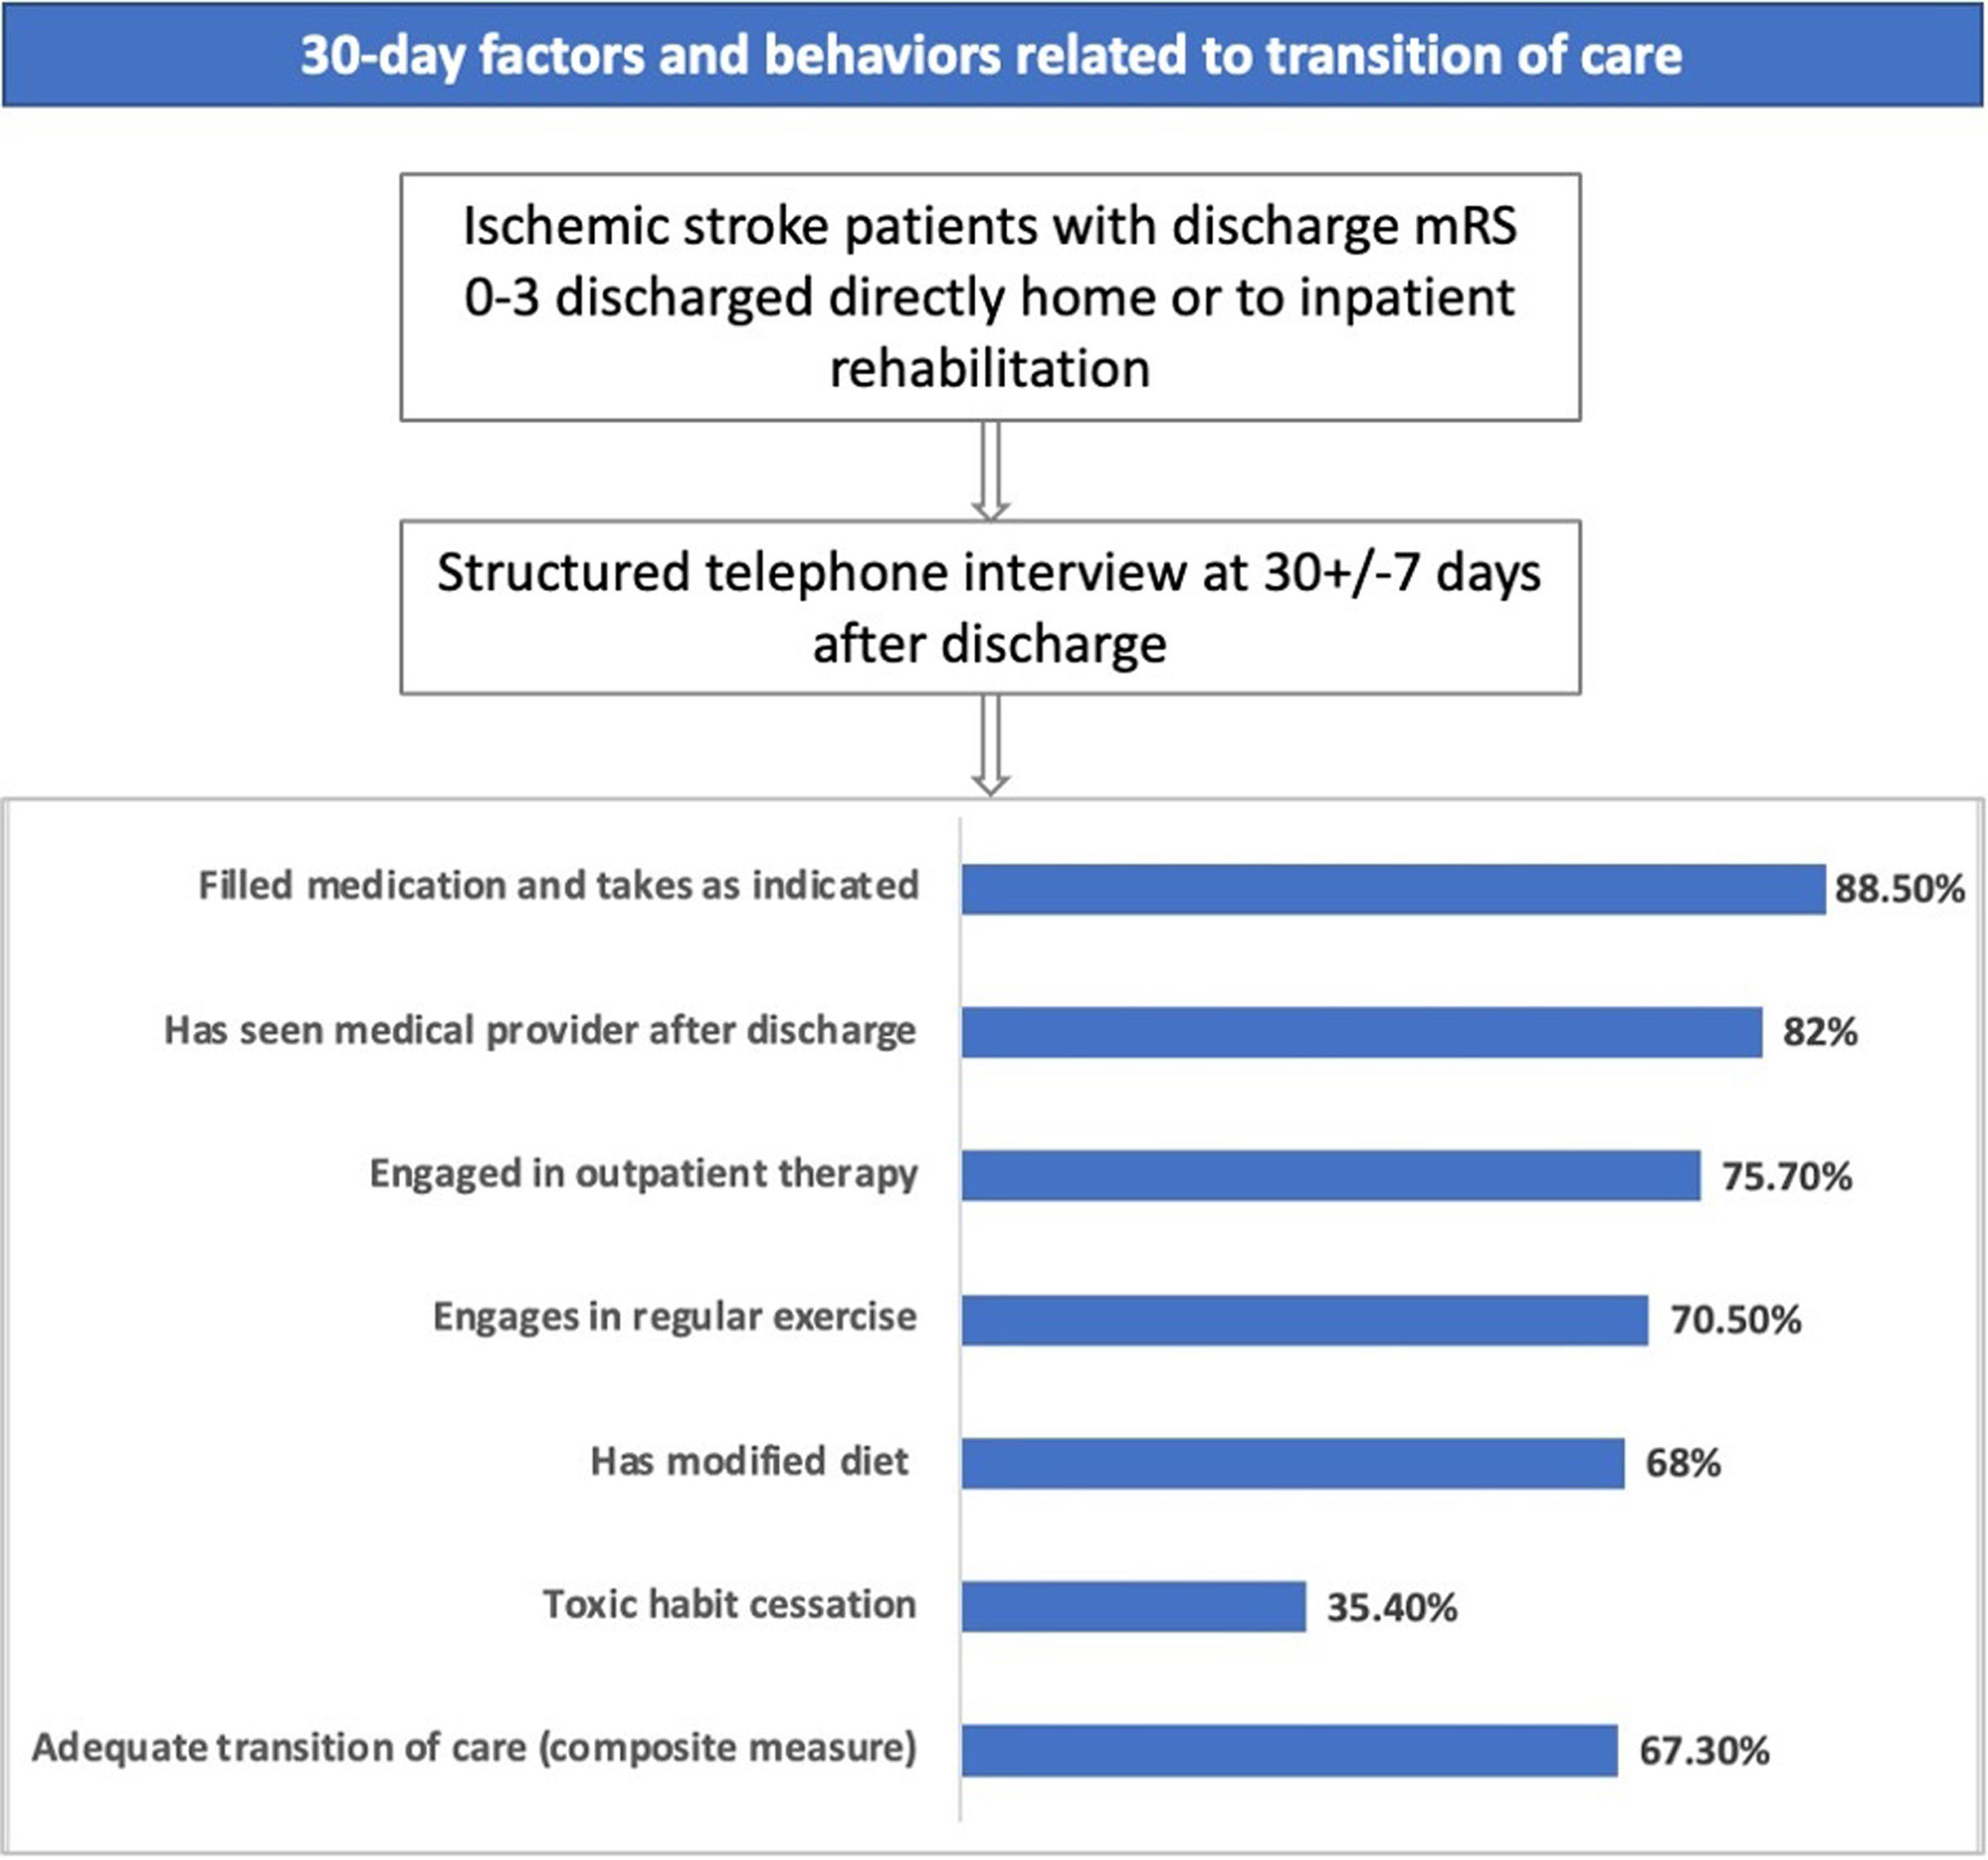 Factors and Behaviors Related to Successful Transition of Care After Hospitalization for Ischemic Stroke